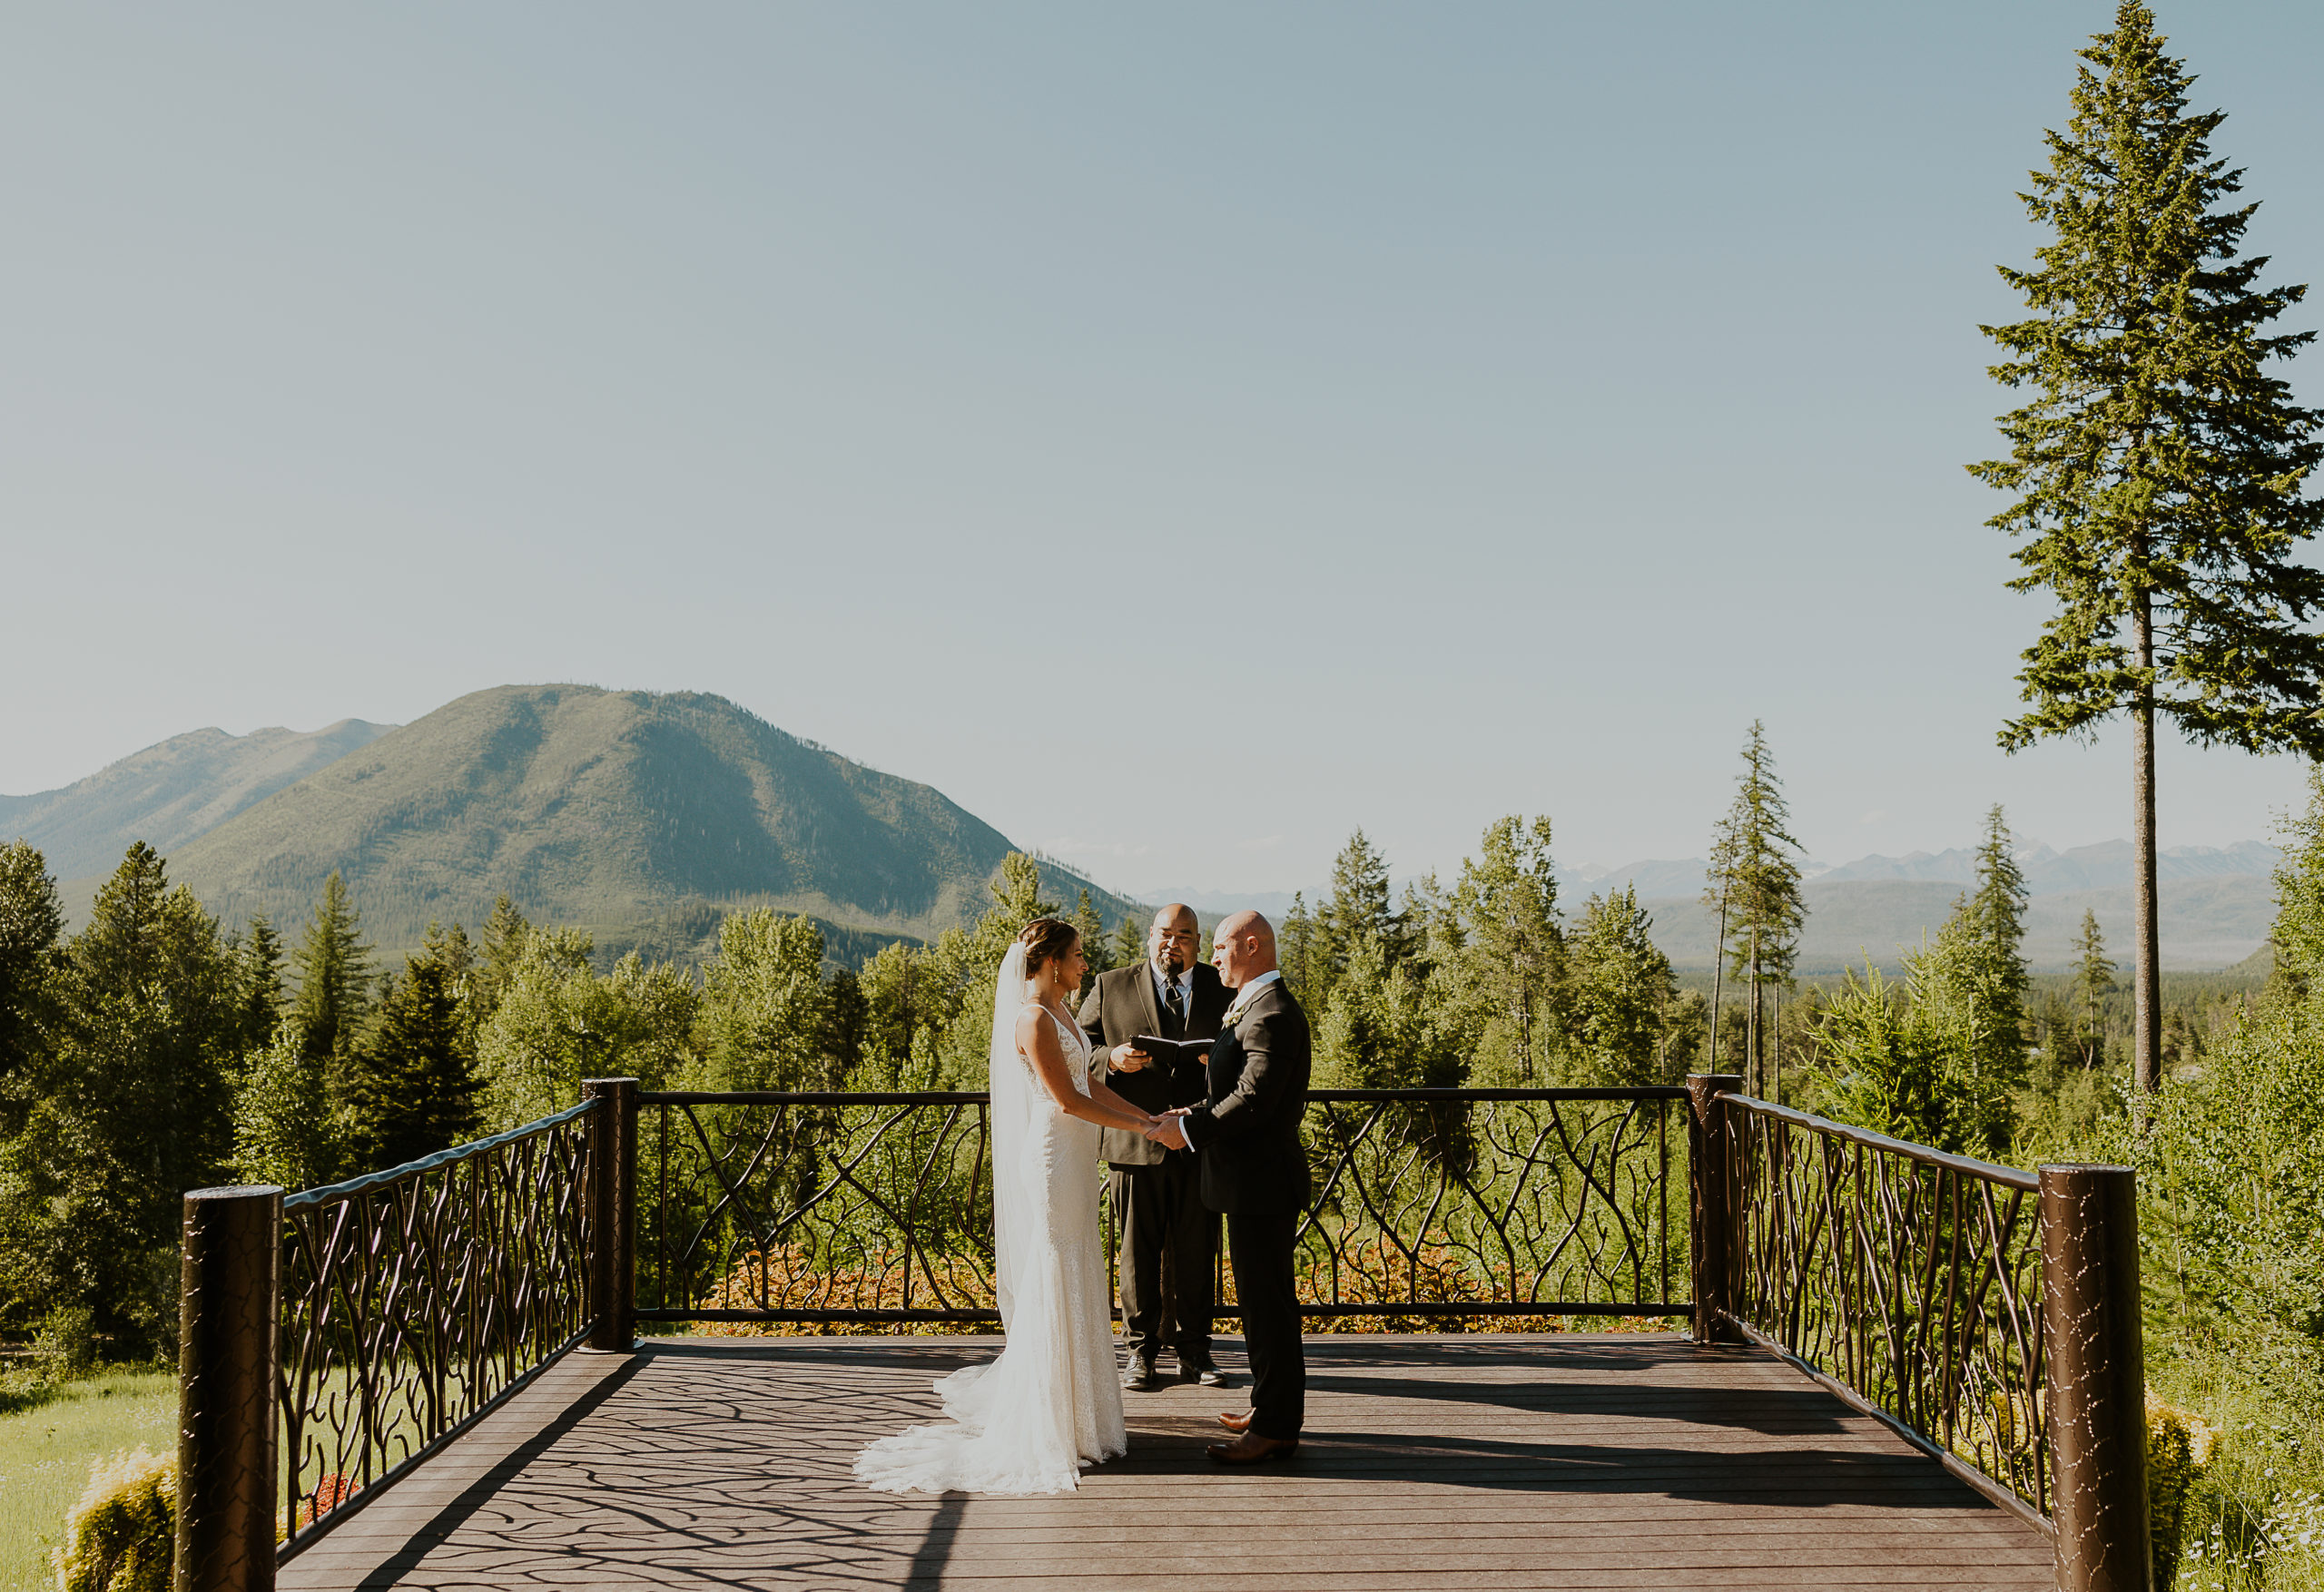 Wedding Ceremony at Glacier Raft Co Wedding and Events in Park View Pavilion. Photo by Haley Jessat